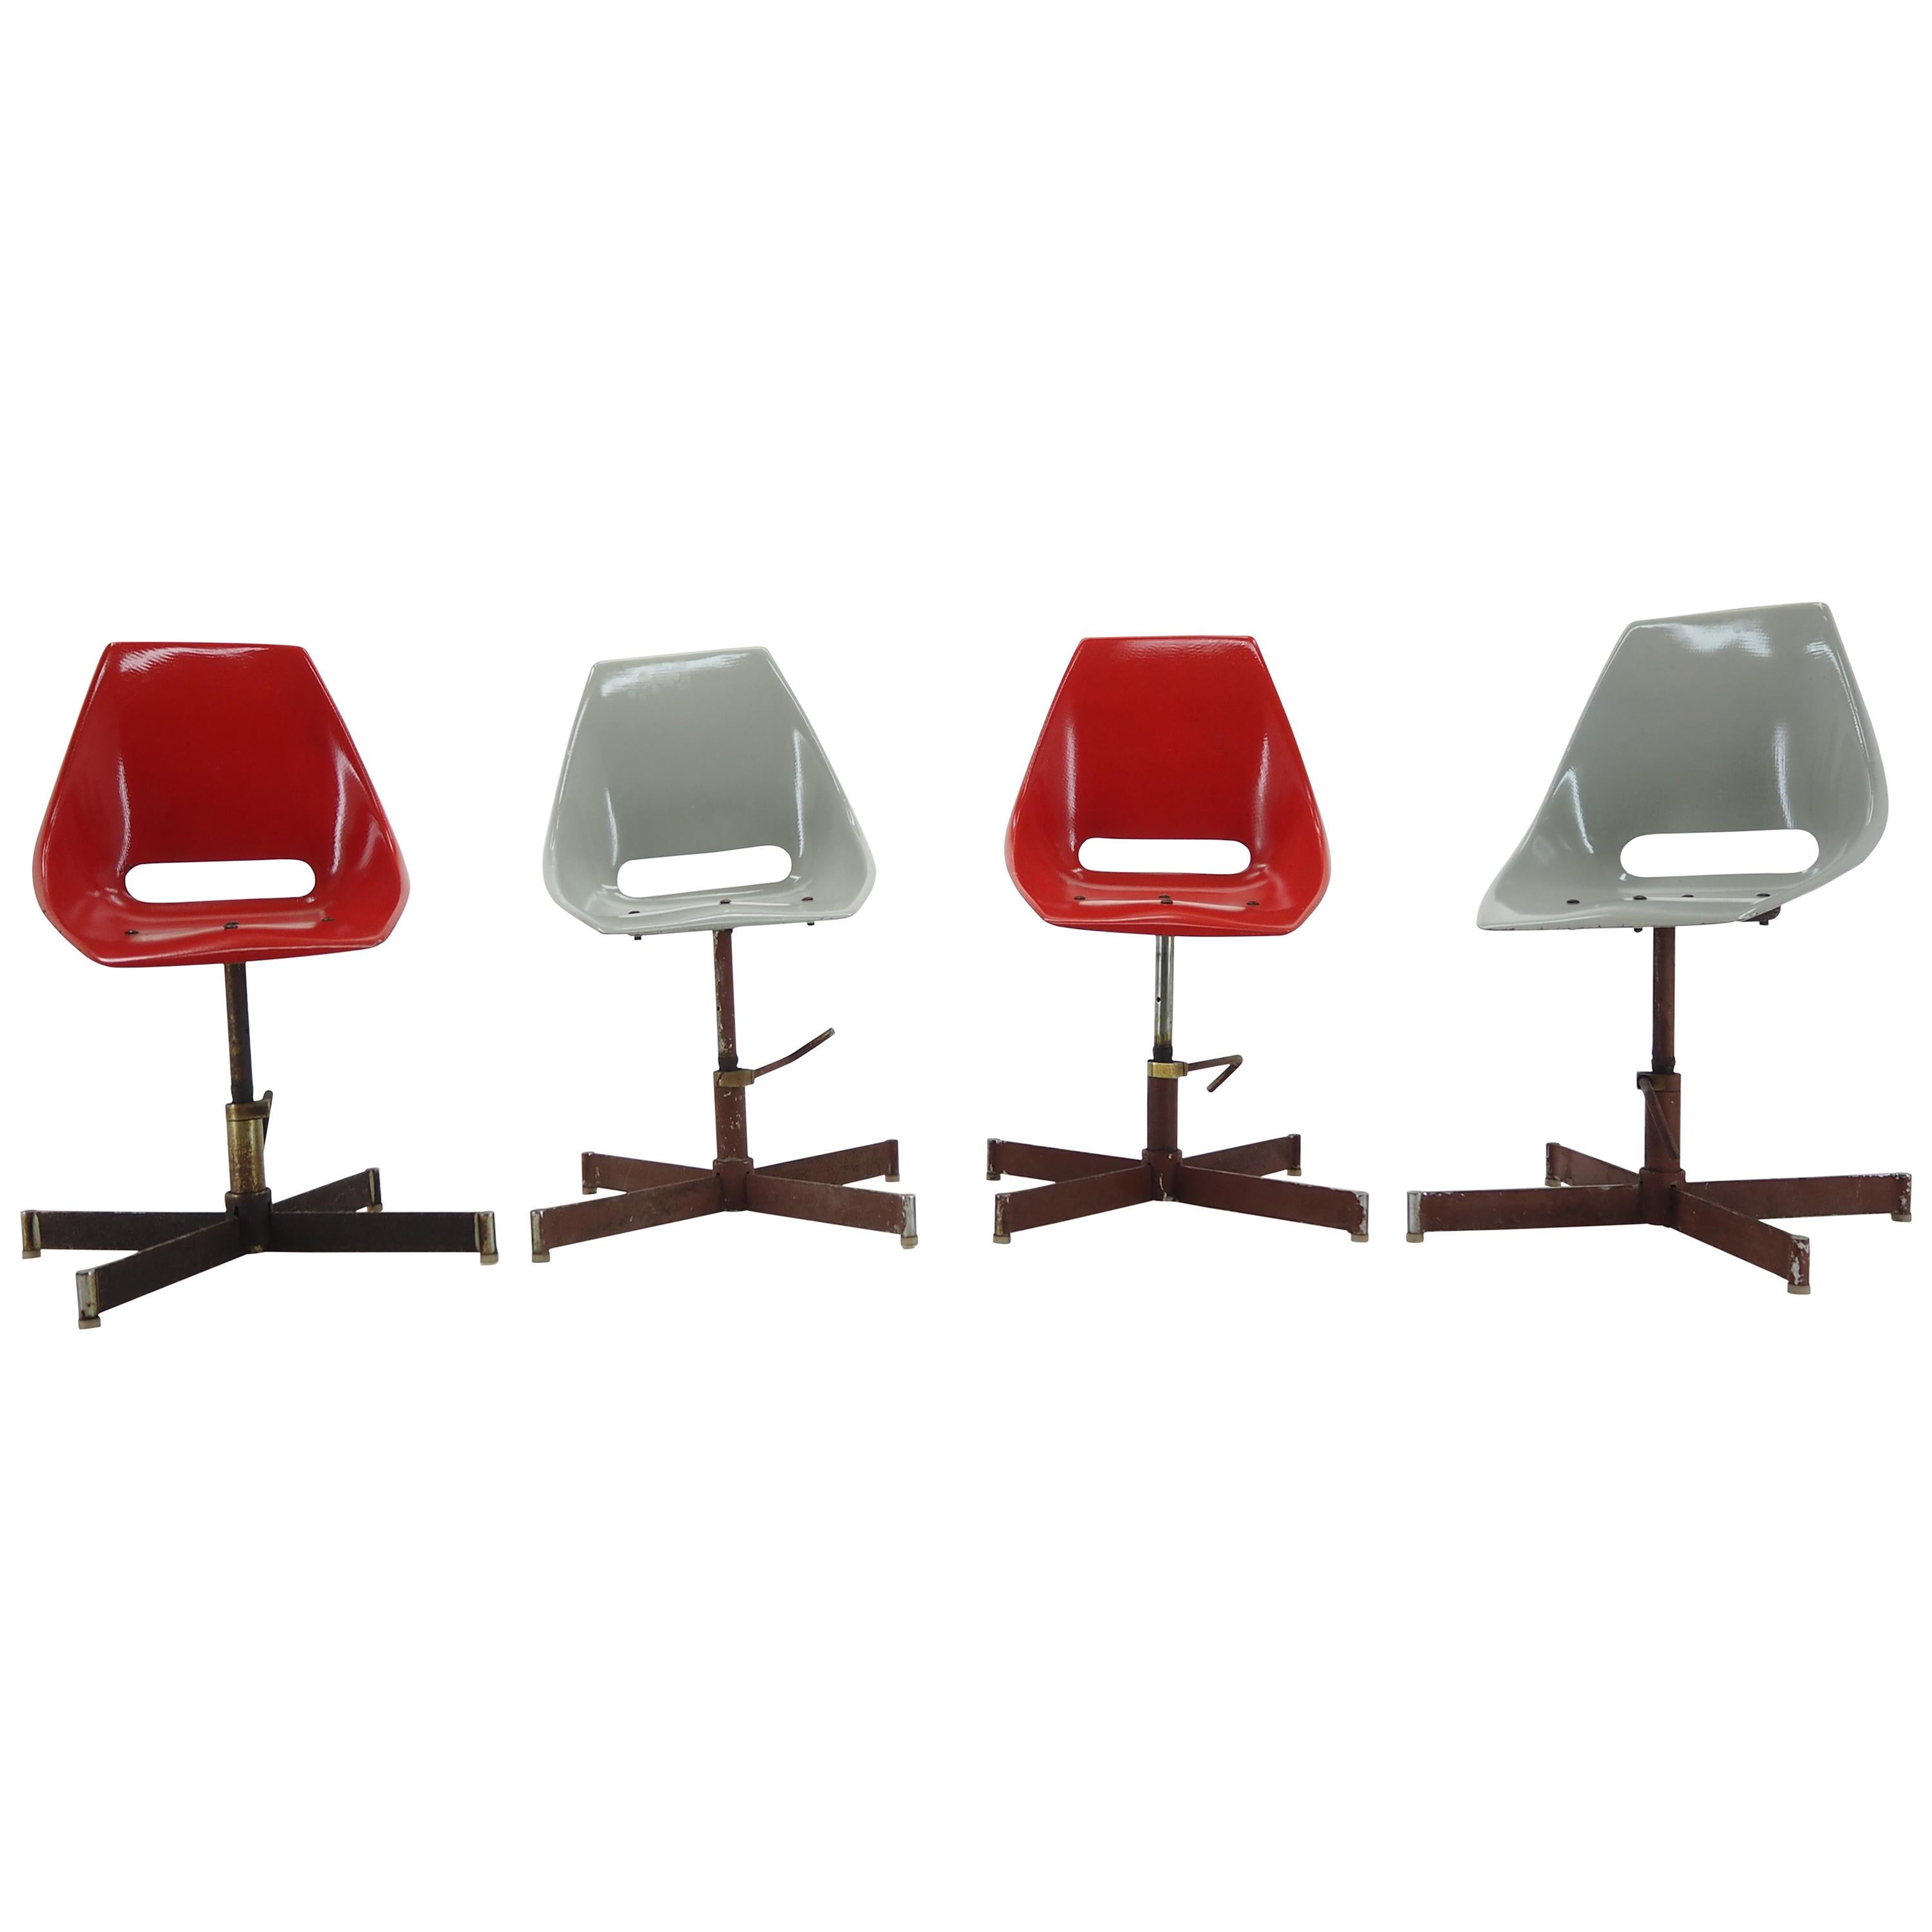 Set of 4 Revolving Industrial Chairs, 1960s